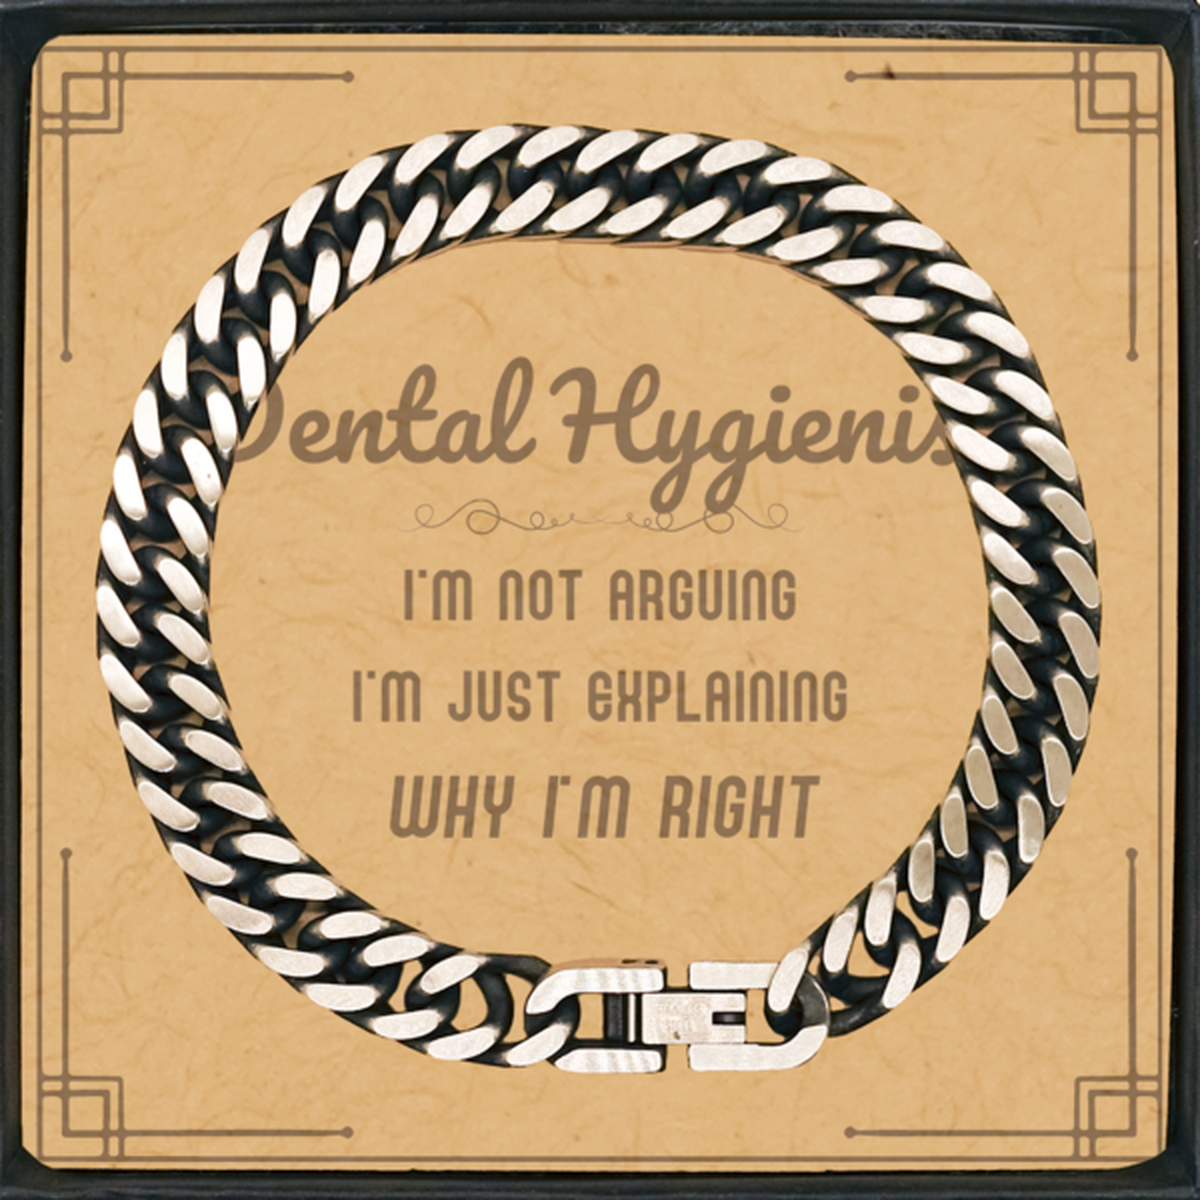 Dental Hygienist I'm not Arguing. I'm Just Explaining Why I'm RIGHT Cuban Link Chain Bracelet, Funny Saying Quote Dental Hygienist Gifts For Dental Hygienist Message Card Graduation Birthday Christmas Gifts for Men Women Coworker